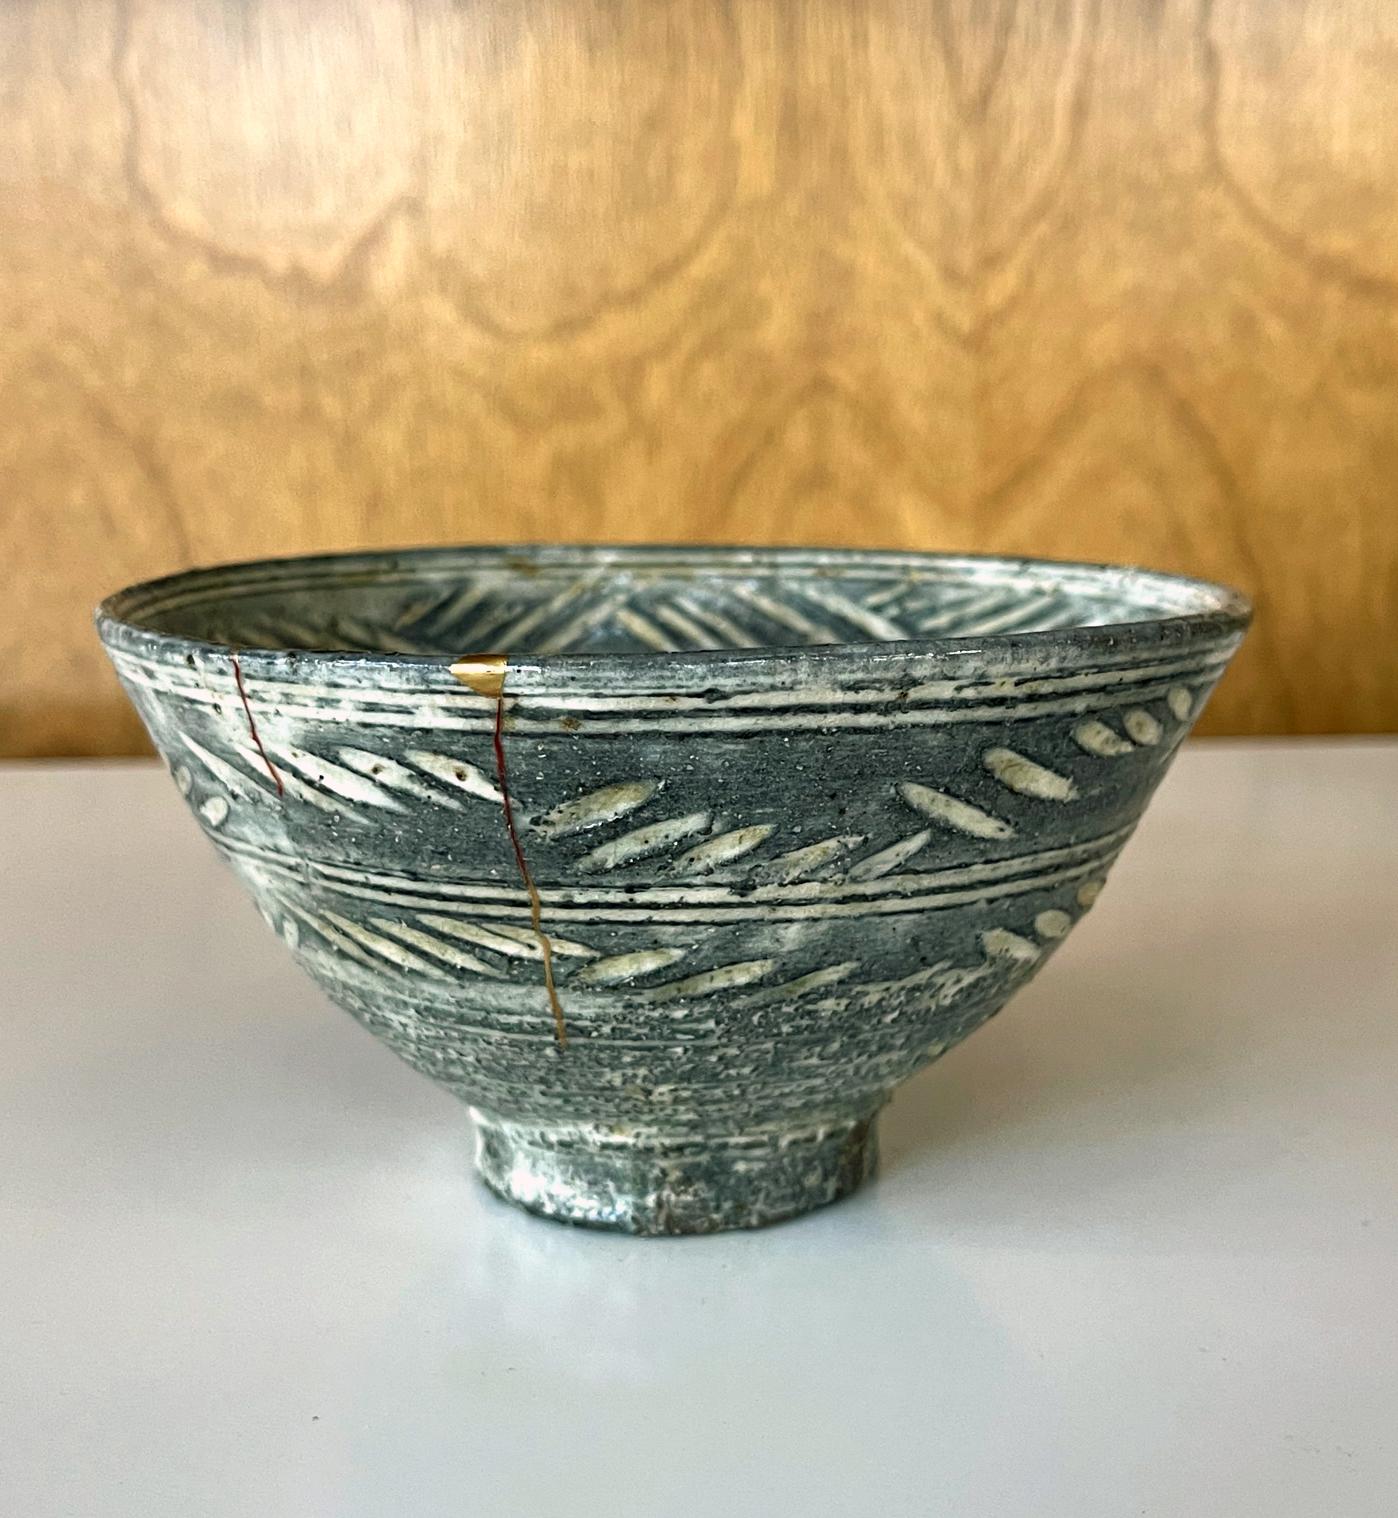 A Korean Hori-Mishima Chawan (tea bowl) circa 16th-17th century (Joseon Dynasty). The tea bowl is of an upright conical form supported by a high foot ring. It was decorated with incised brushwood fence patterns filled with white slip on both the